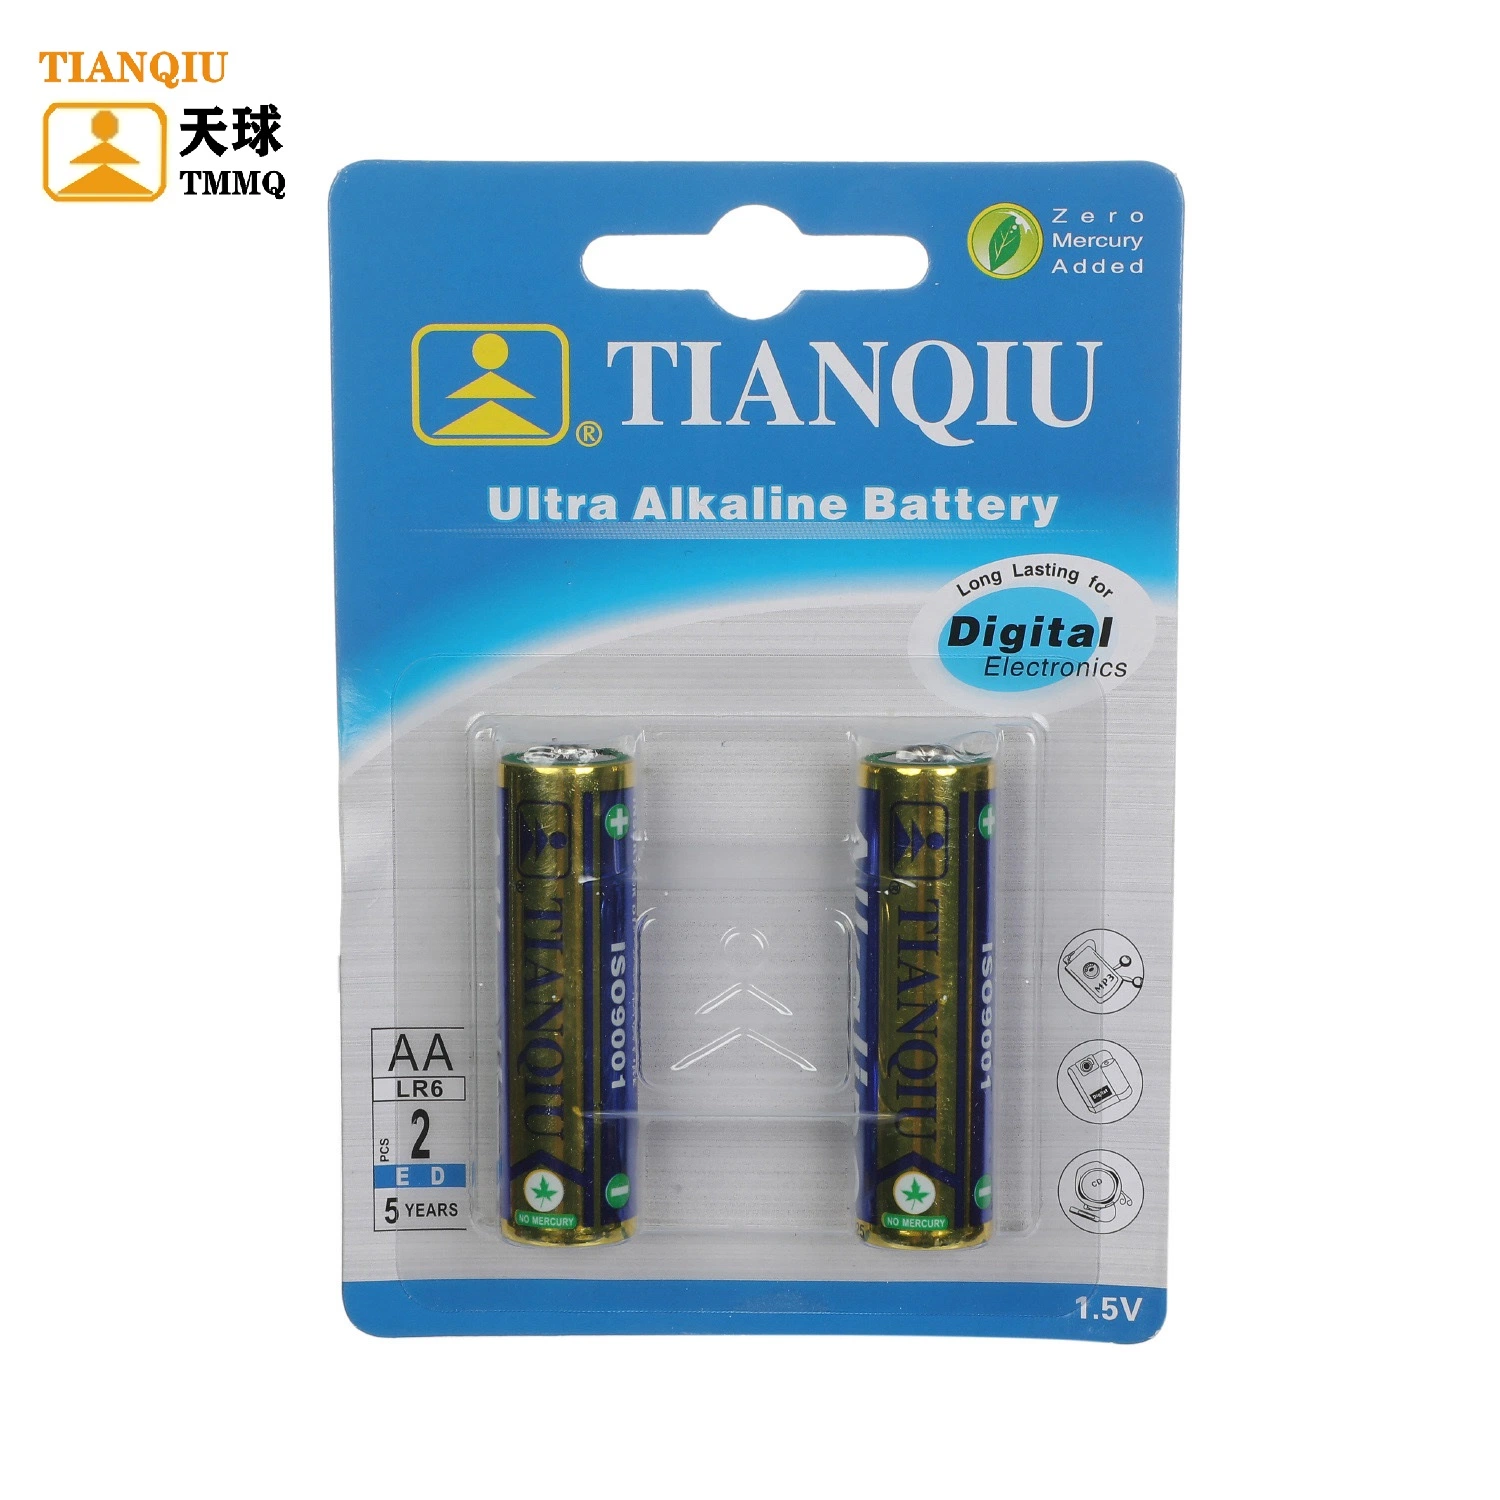 Tianqiu AA Alkaline Lr6 1.5V Dry Cell Battery Wholesale Factory Price Reloj